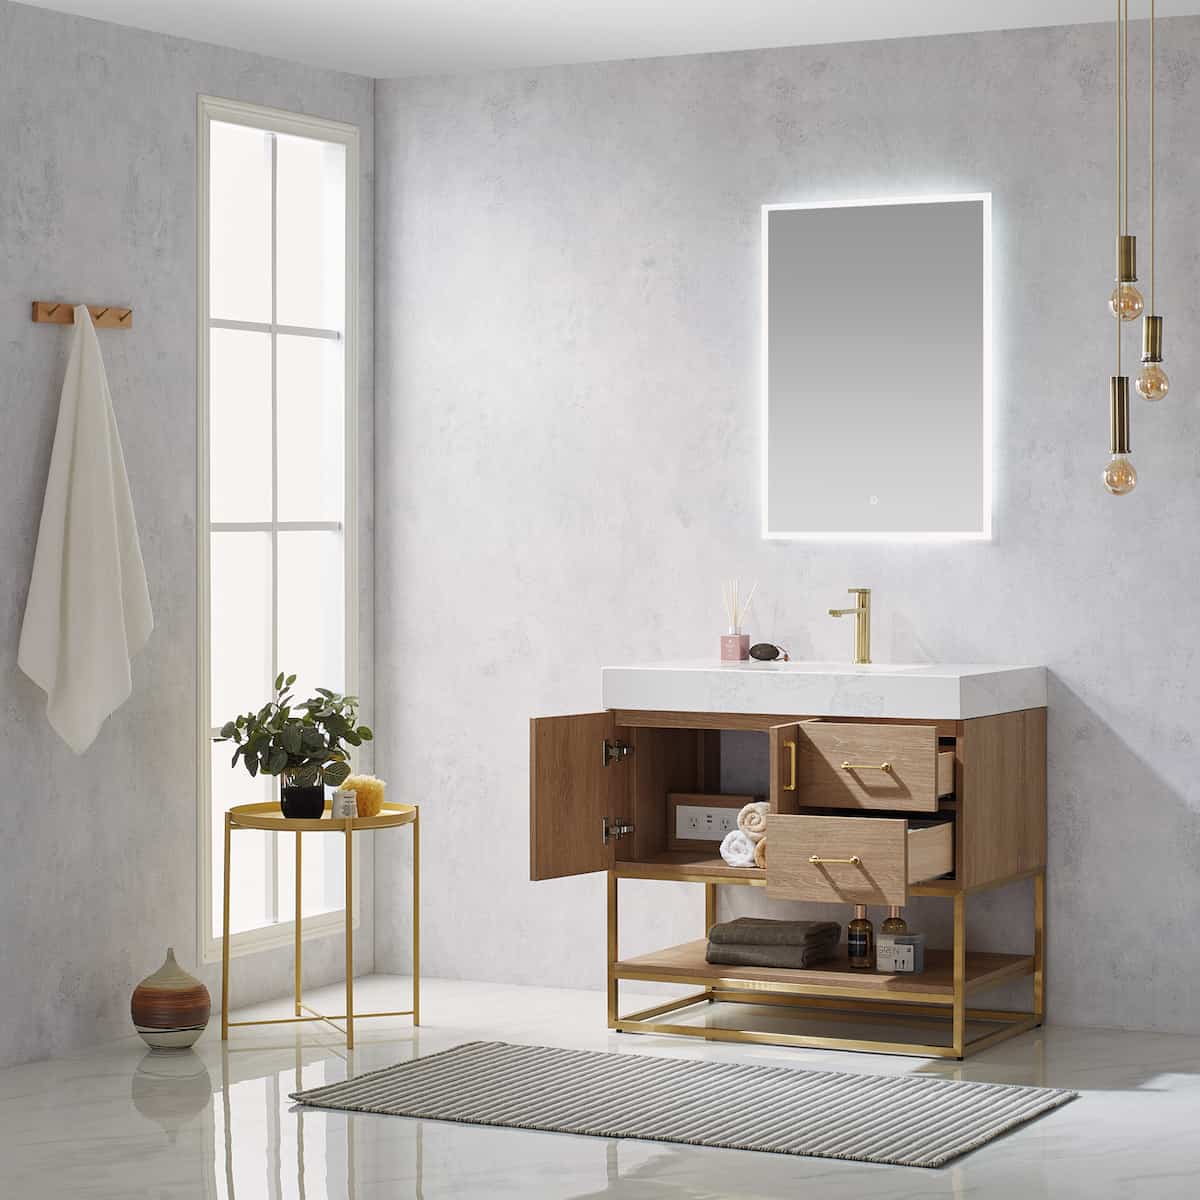 Vinnova Alistair 36 Inch Freestanding Single Vanity in North American Oak and Brushed Gold Frame with White Grain Stone Countertop With Mirror Inside 789036-NO-GW